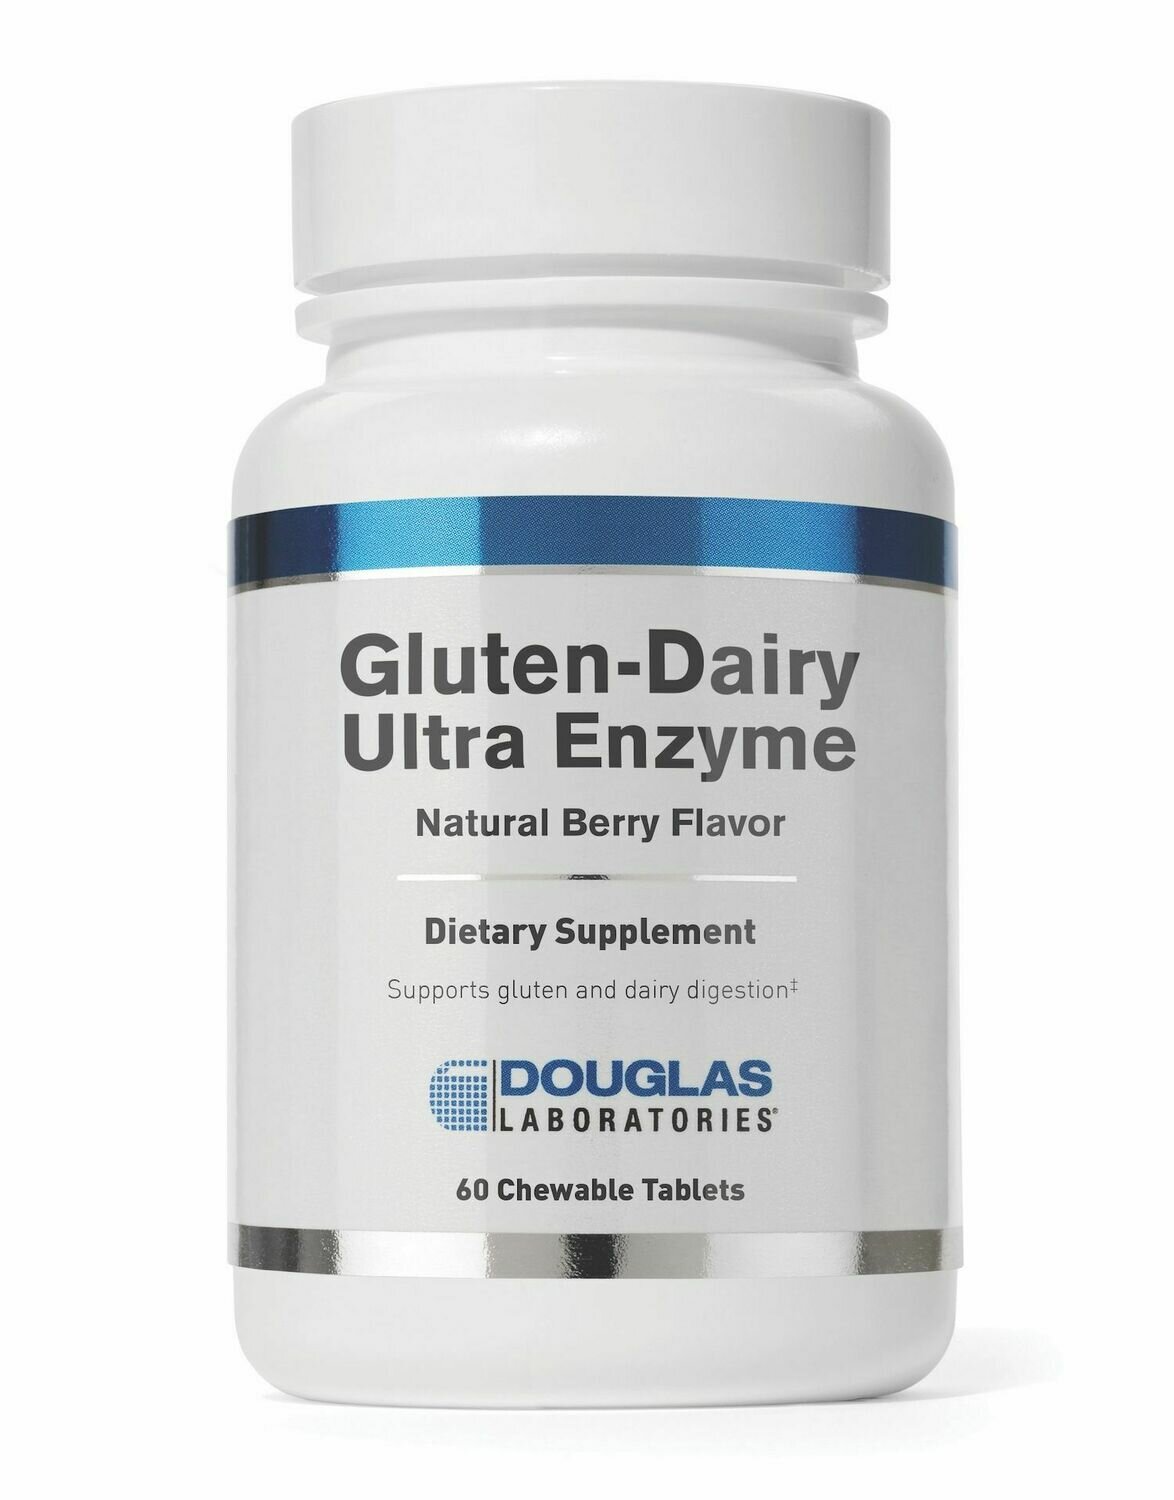 Gluten-Dairy Ultra Enzyme 60 chewable tablets